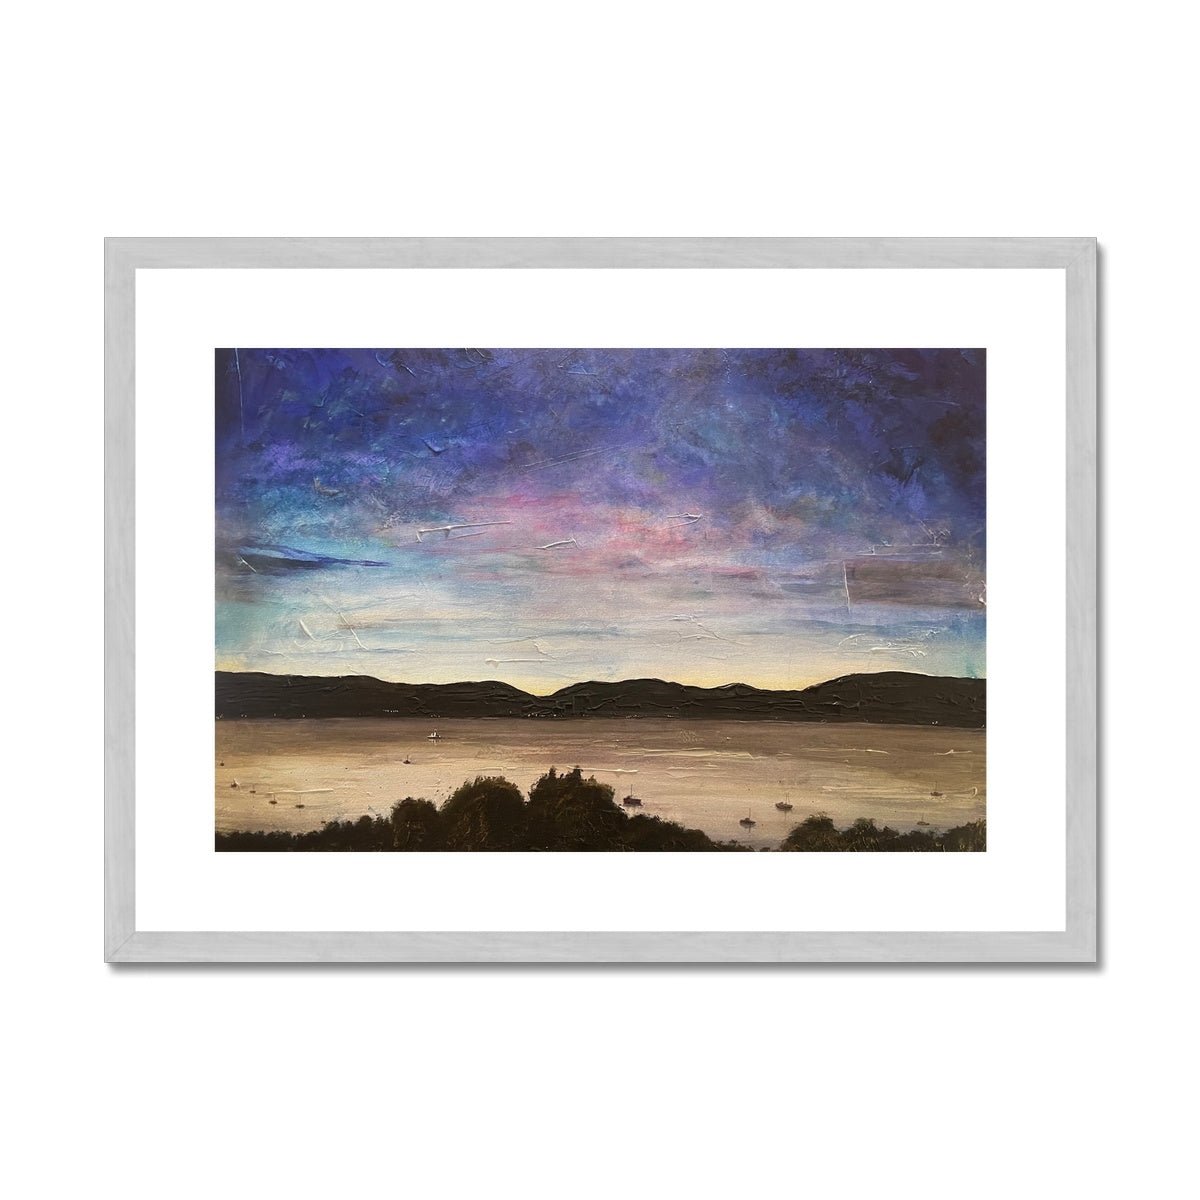 River Clyde Twilight Painting | Antique Framed & Mounted Prints From Scotland-Antique Framed & Mounted Prints-River Clyde Art Gallery-A2 Landscape-Silver Frame-Paintings, Prints, Homeware, Art Gifts From Scotland By Scottish Artist Kevin Hunter